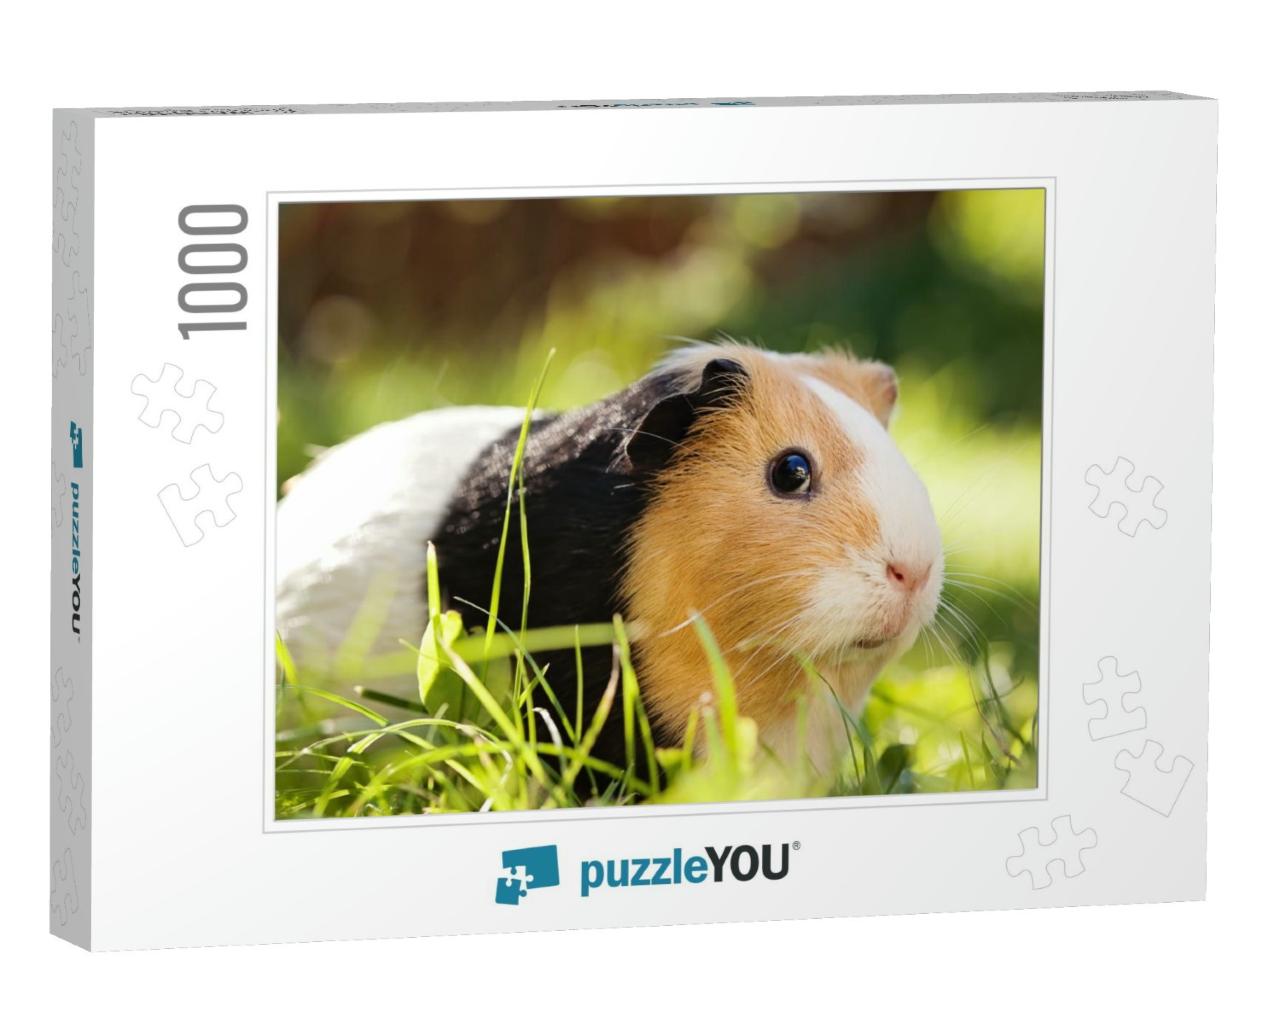 Guinea Pig Cavia Porcellus is a Popular Household Pet... Jigsaw Puzzle with 1000 pieces